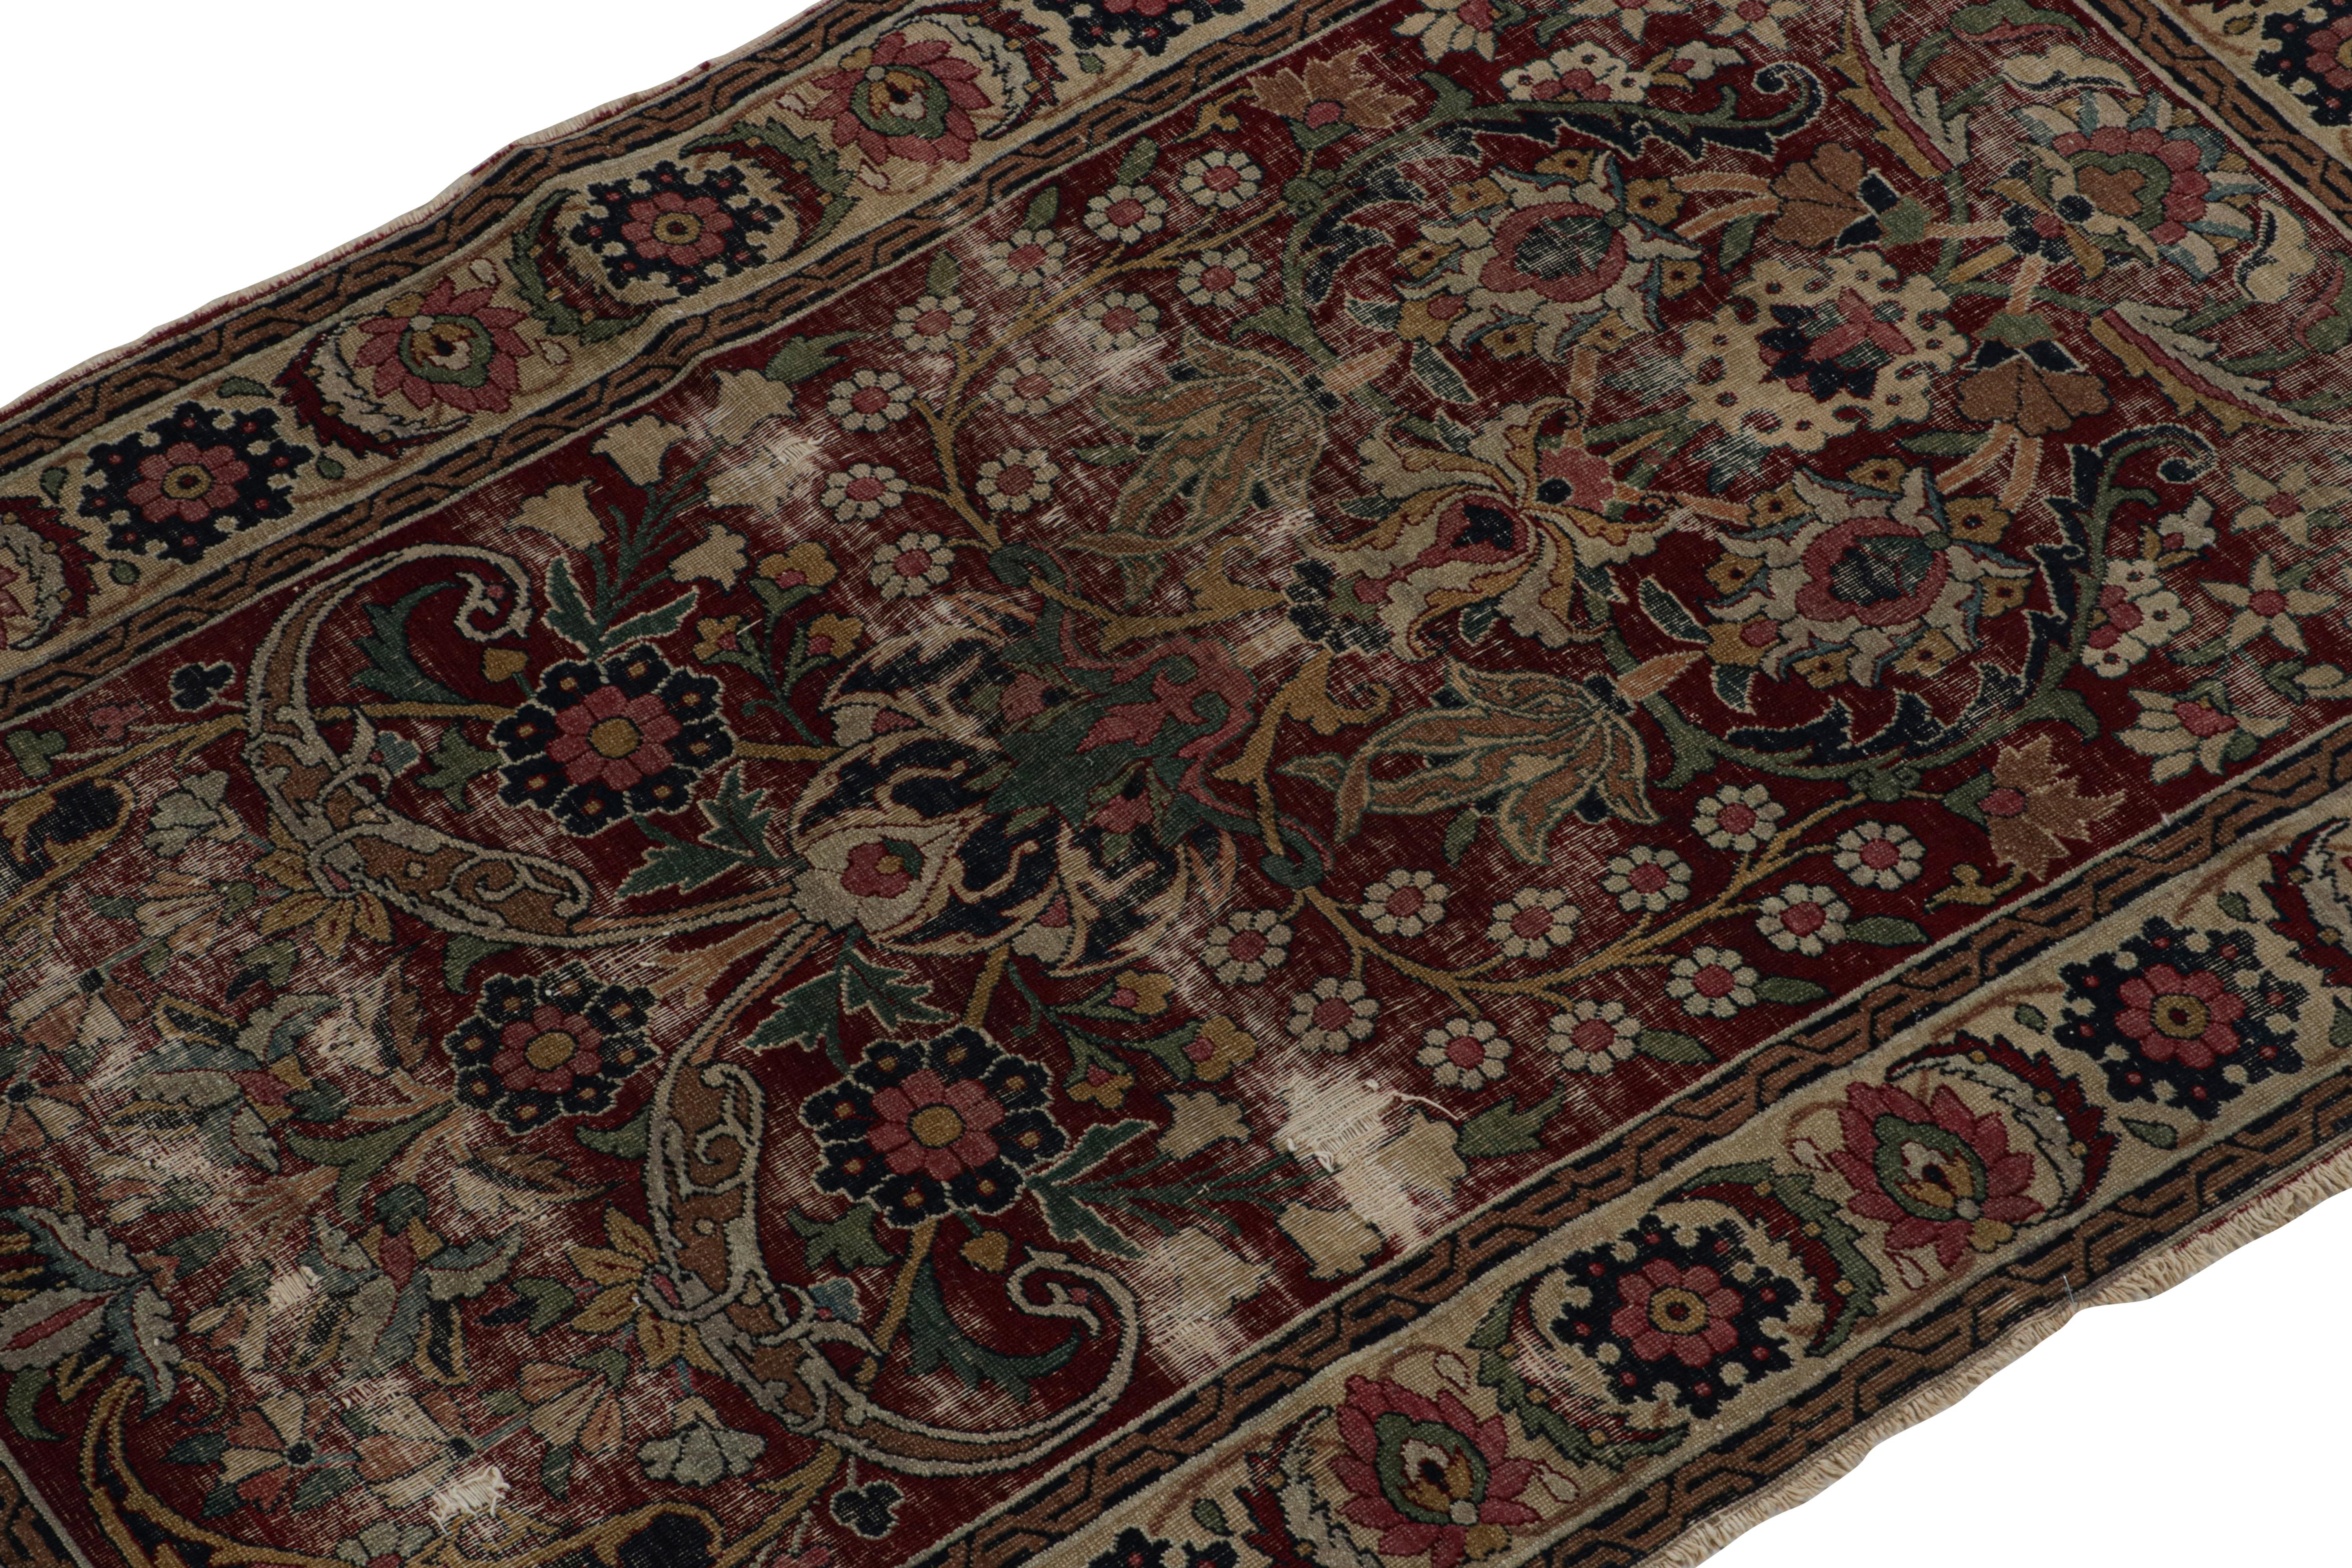 Hand-Knotted Antique Persian Khorassan Rug in Burgundy with Floral Patterns, from Rug & Kilim For Sale